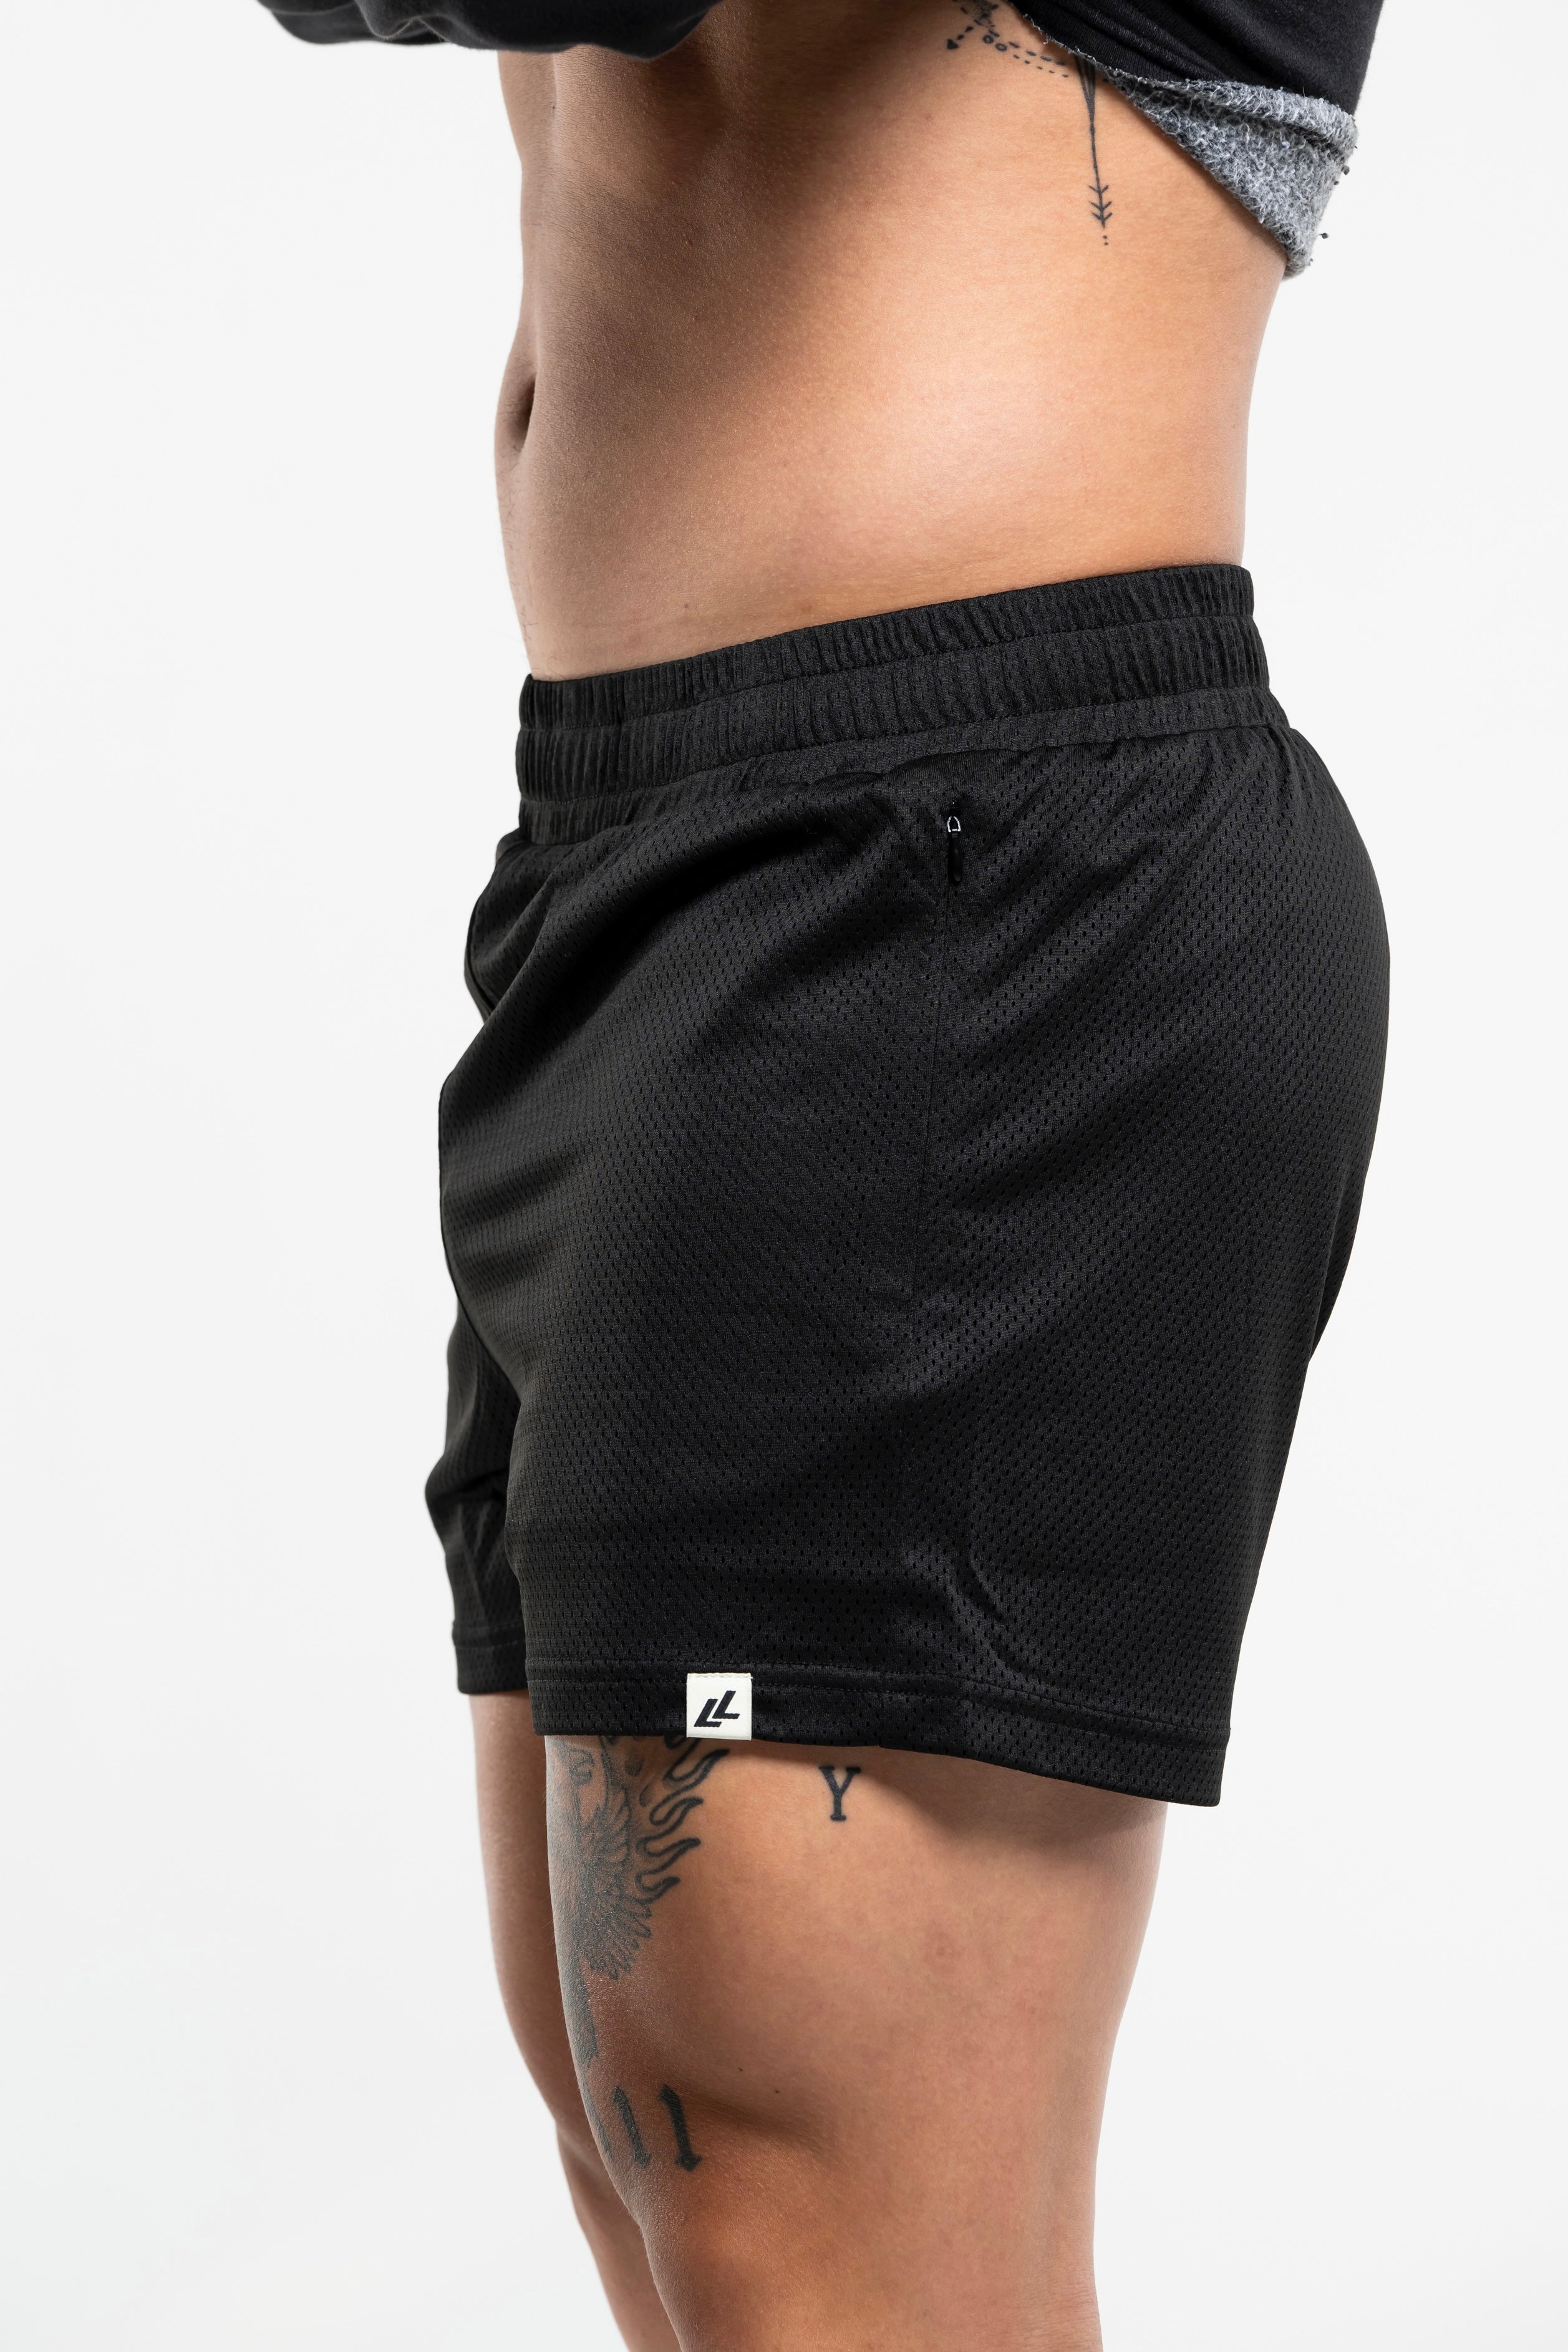 Midnight Movers workout shorts